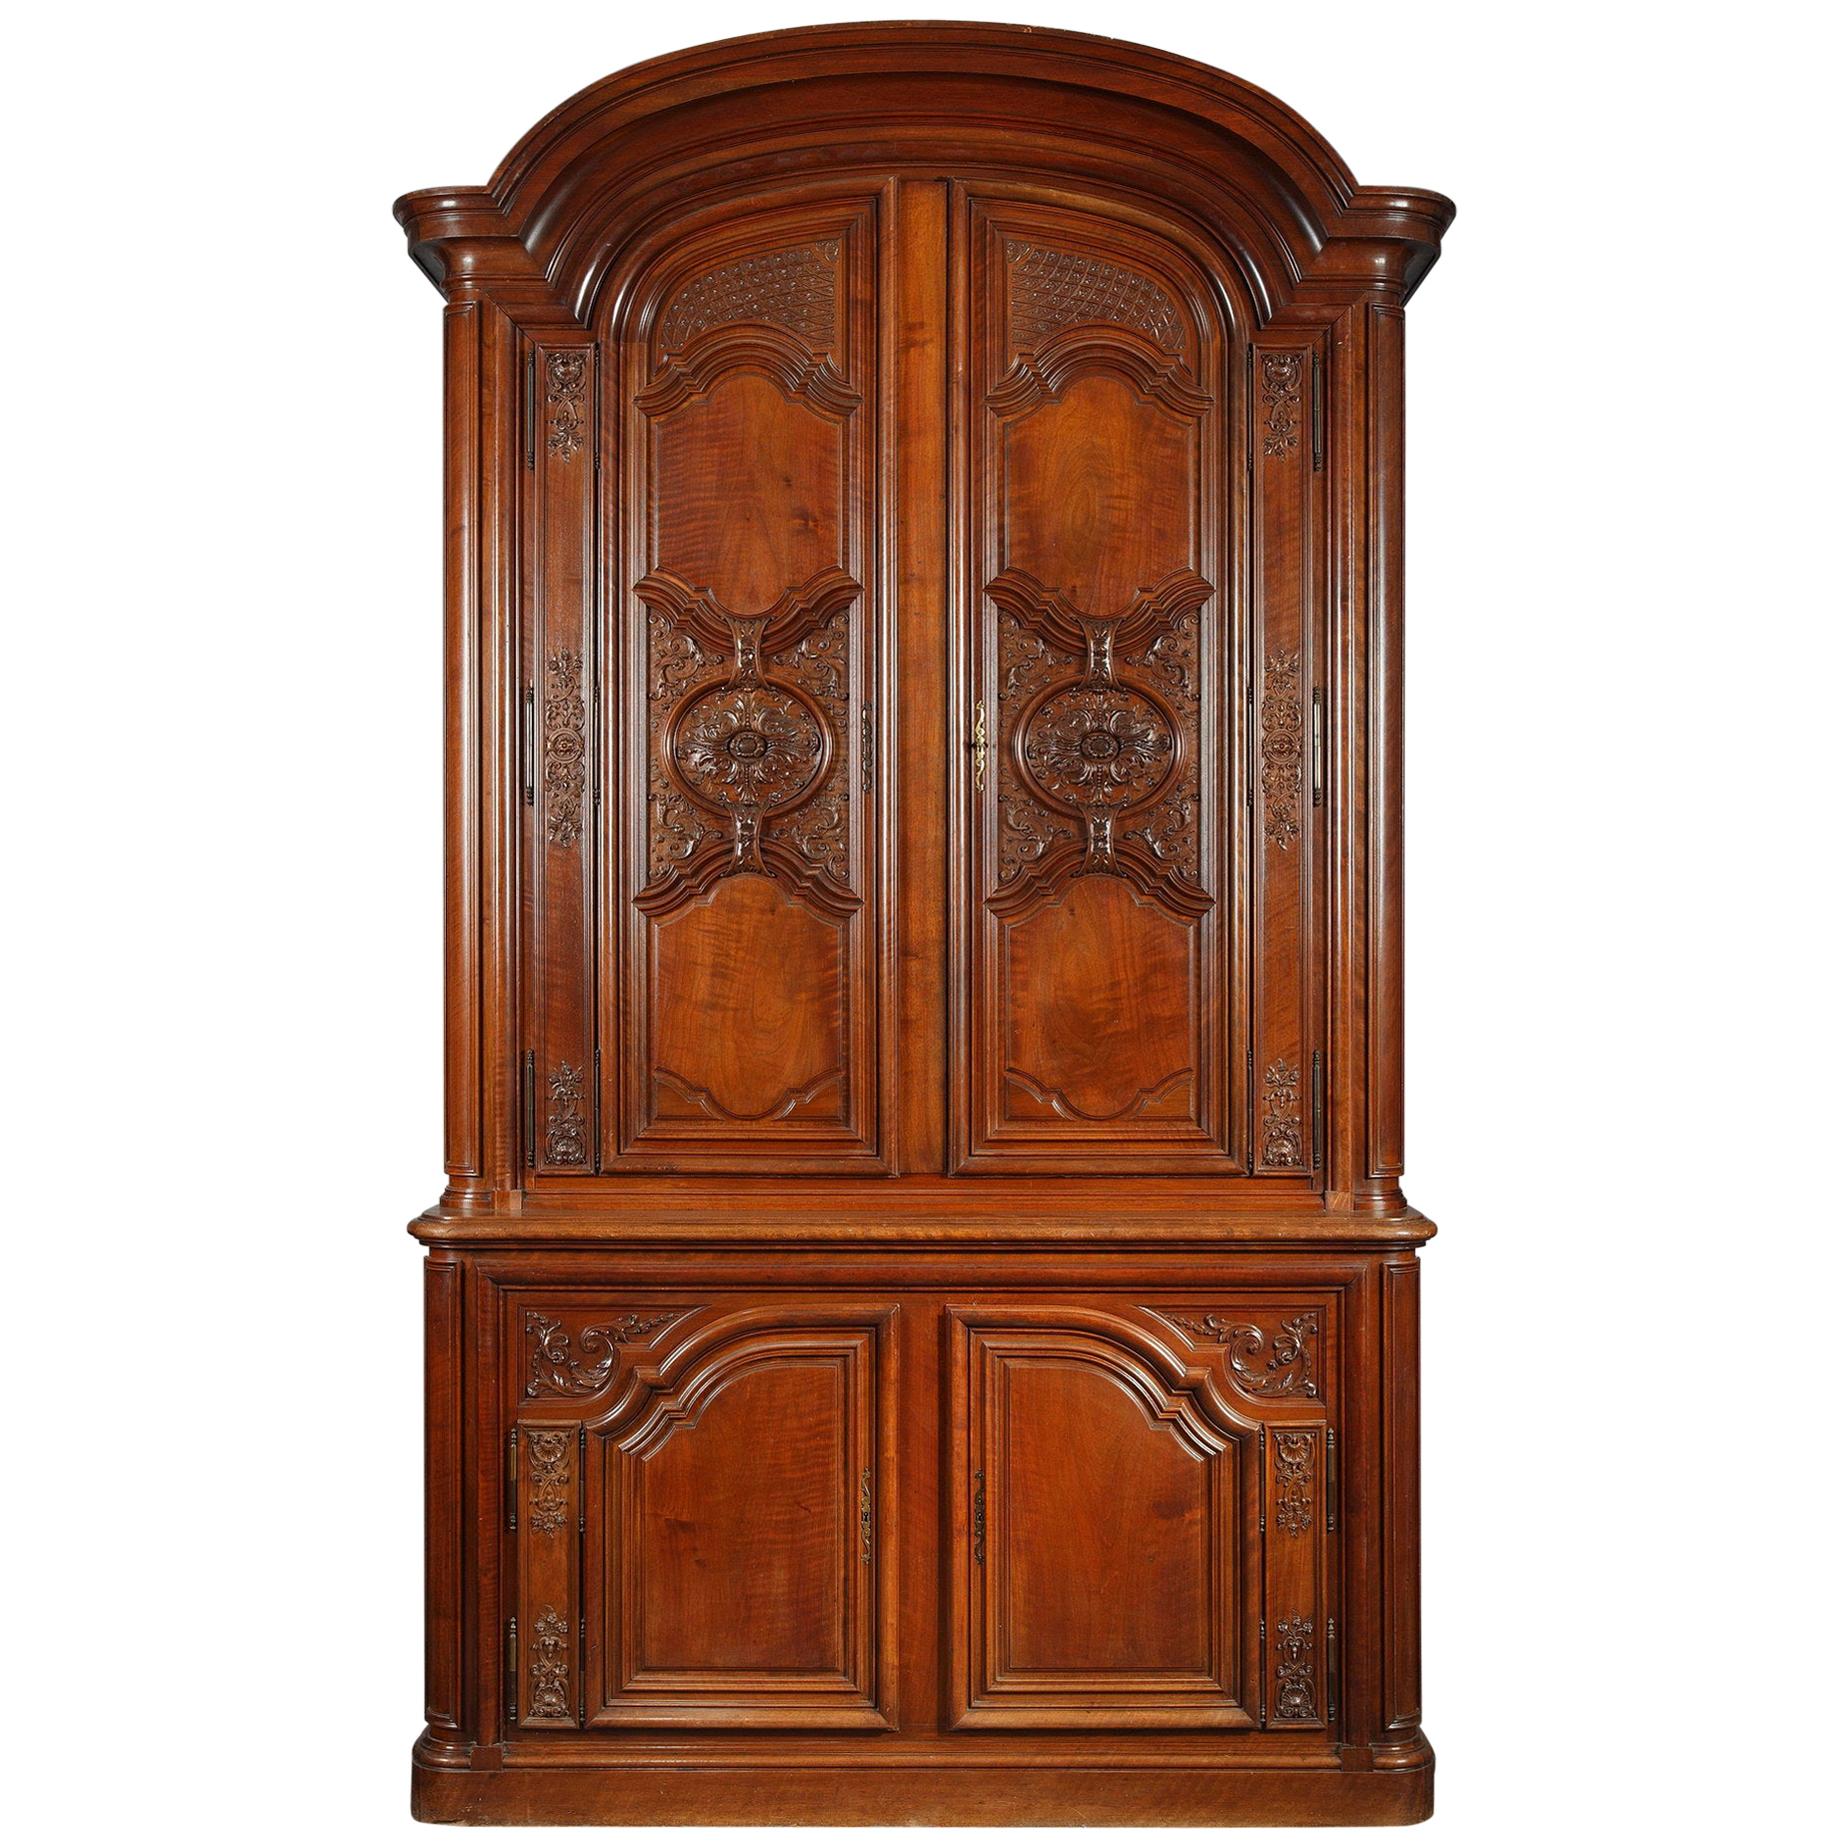 Regence Style Wooden Display-Cabinet by C. Potheau, France, circa 1895 For Sale